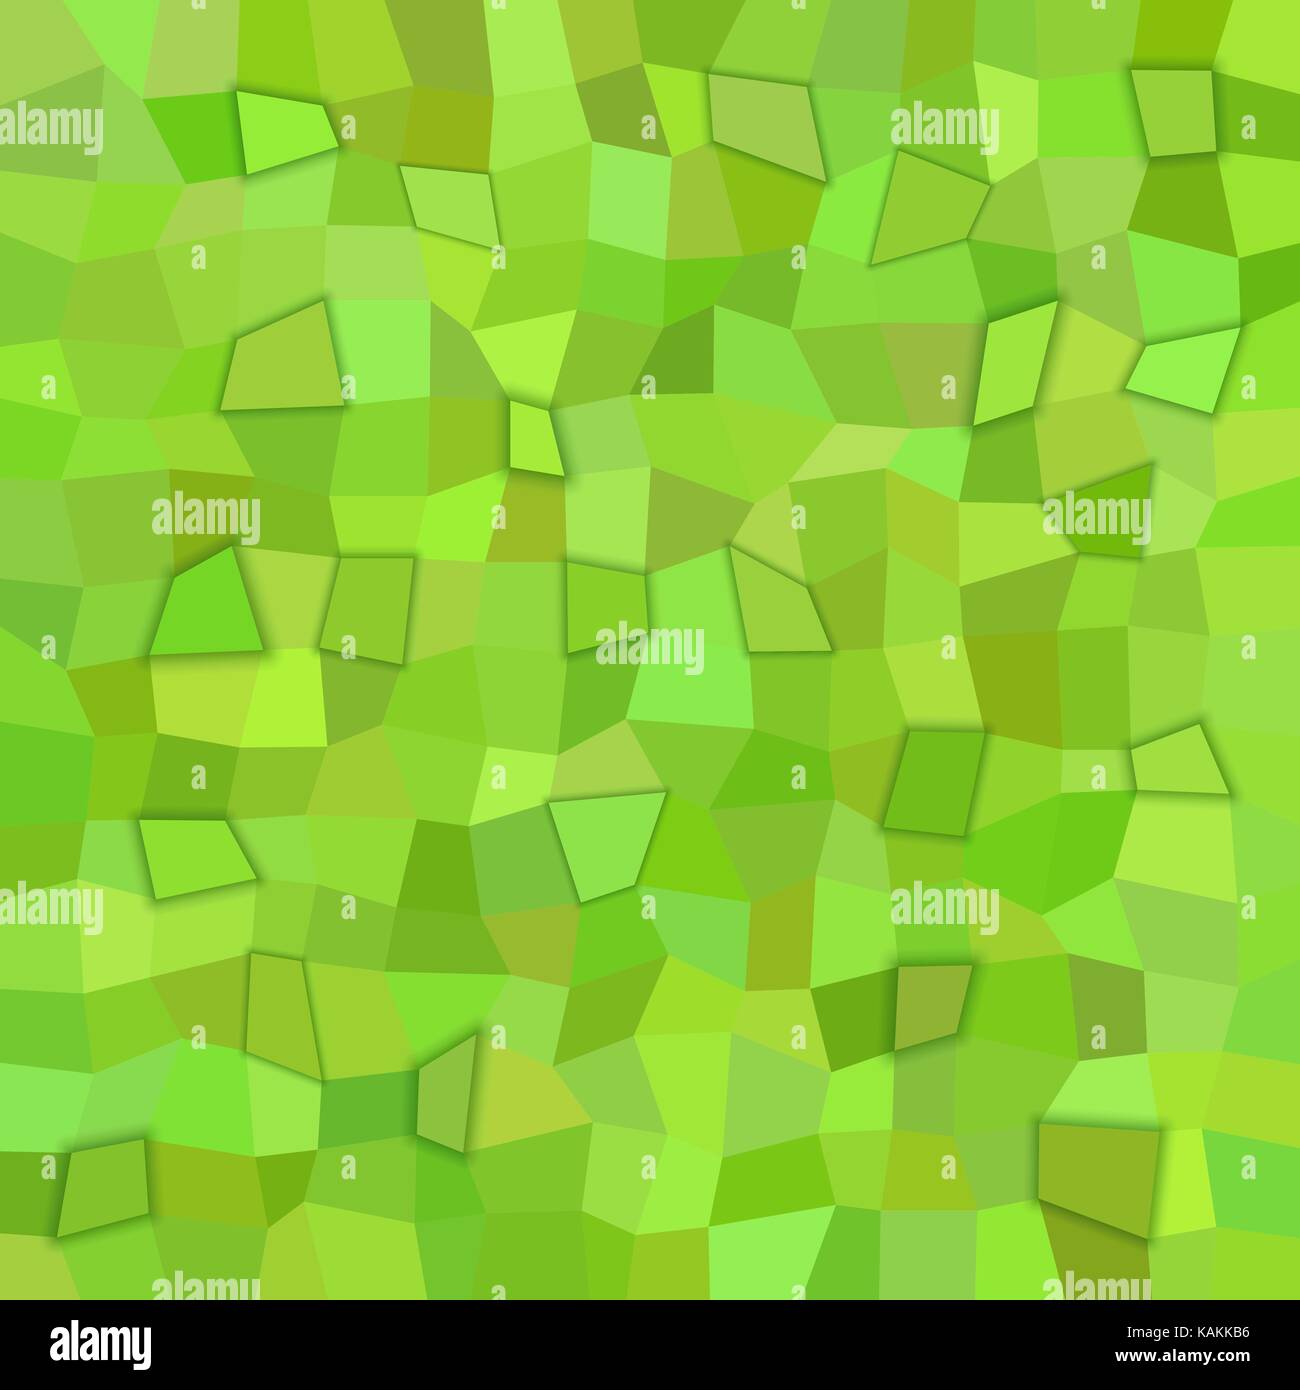 Green rectangle tiled mosaic pattern background with 3d effect Stock Vector